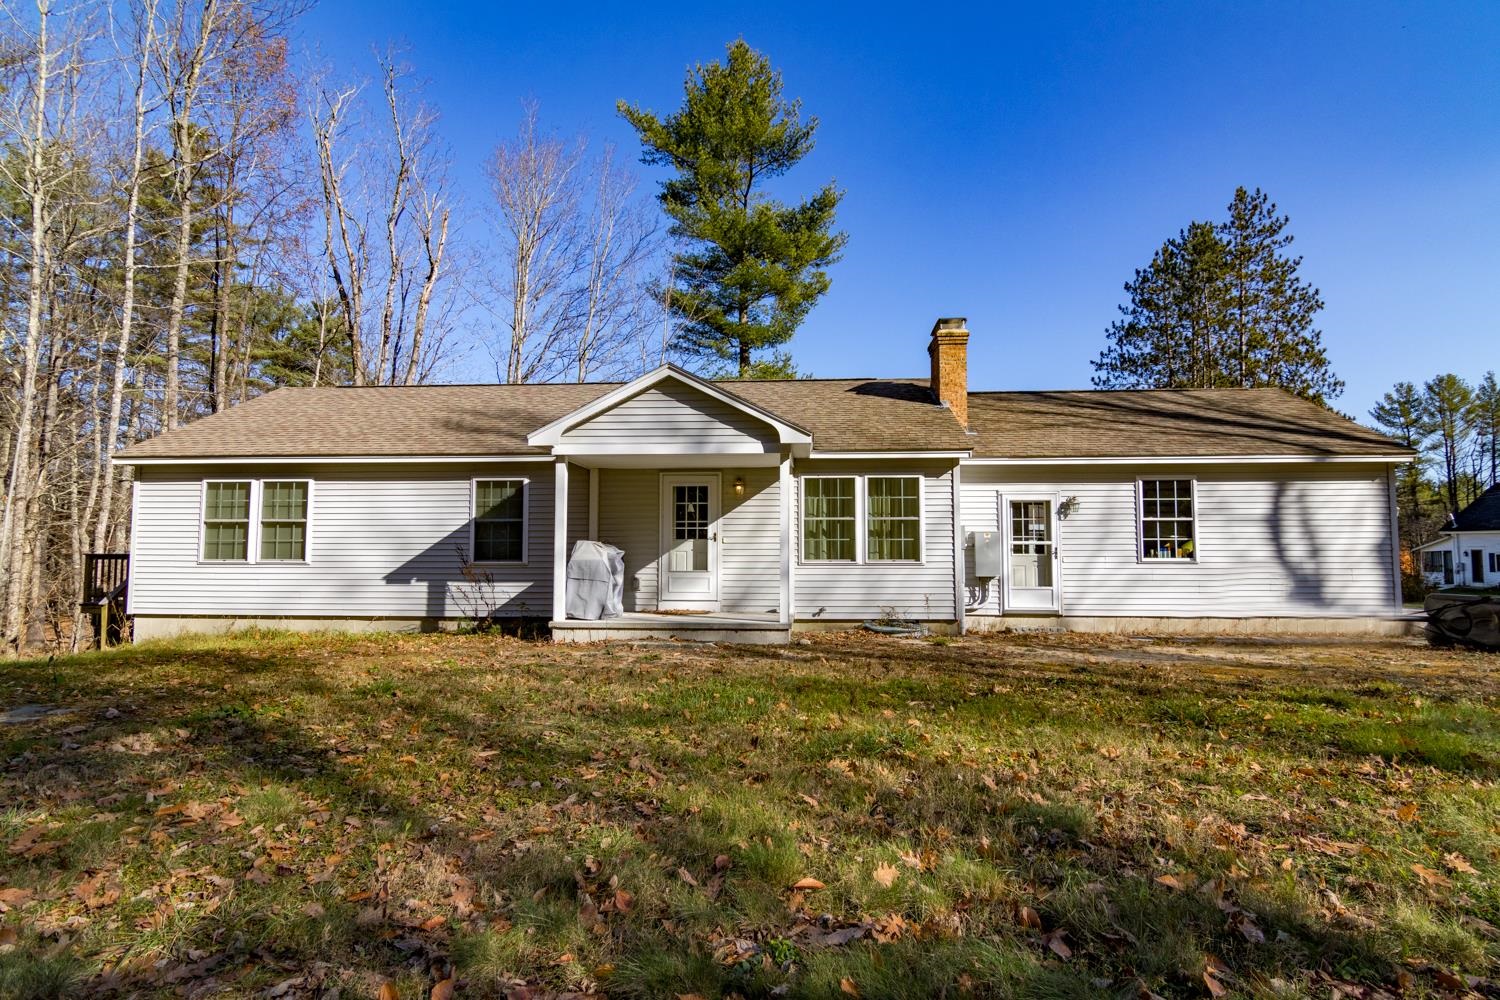 HEBRON NH Homes for sale